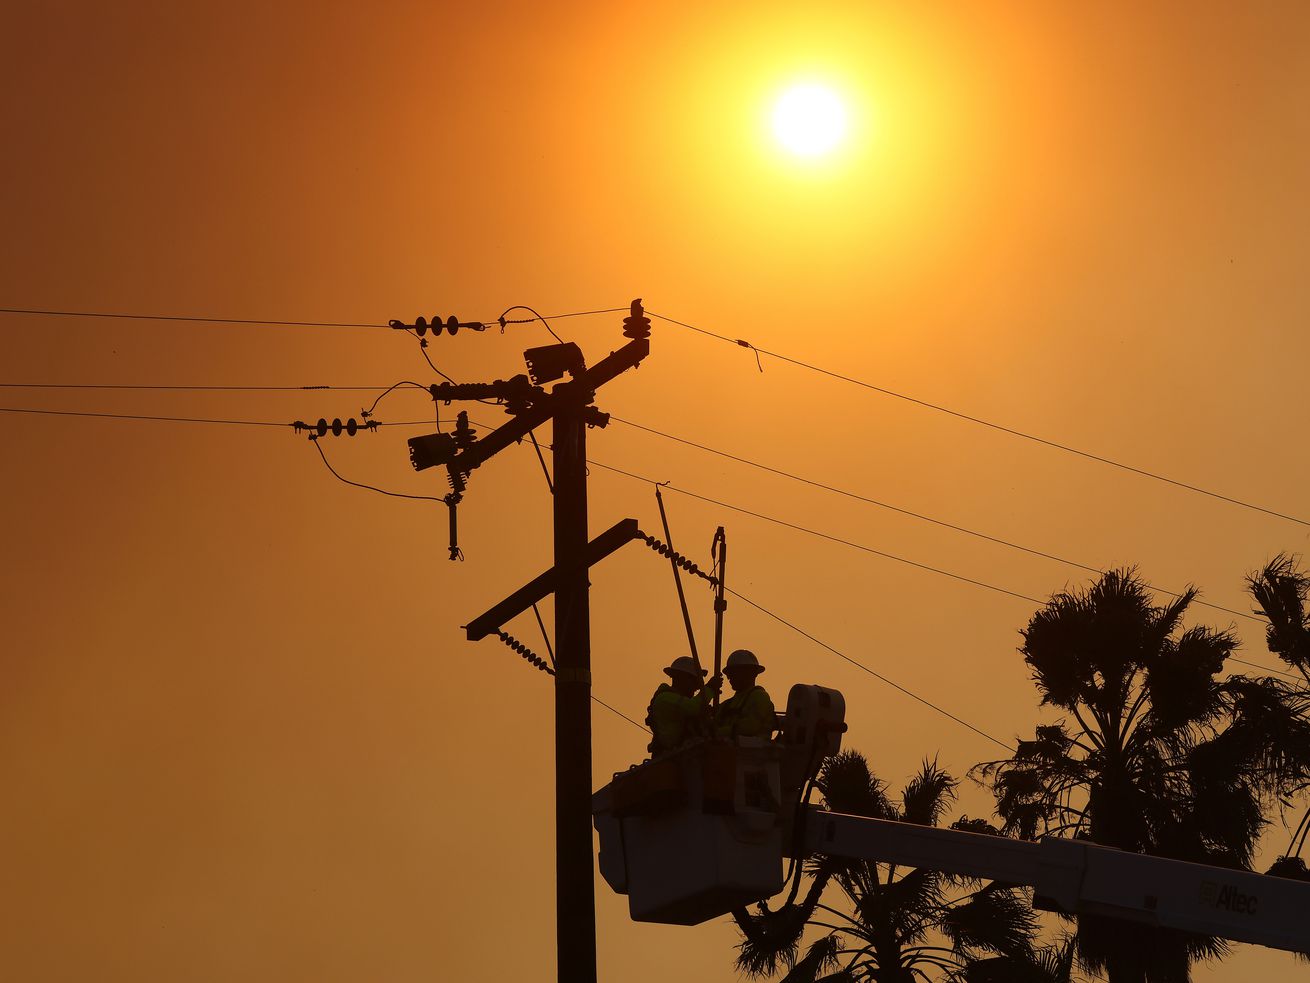 Workers in a cherry-picker basket approach a power pole while a bright sun glares overhead.